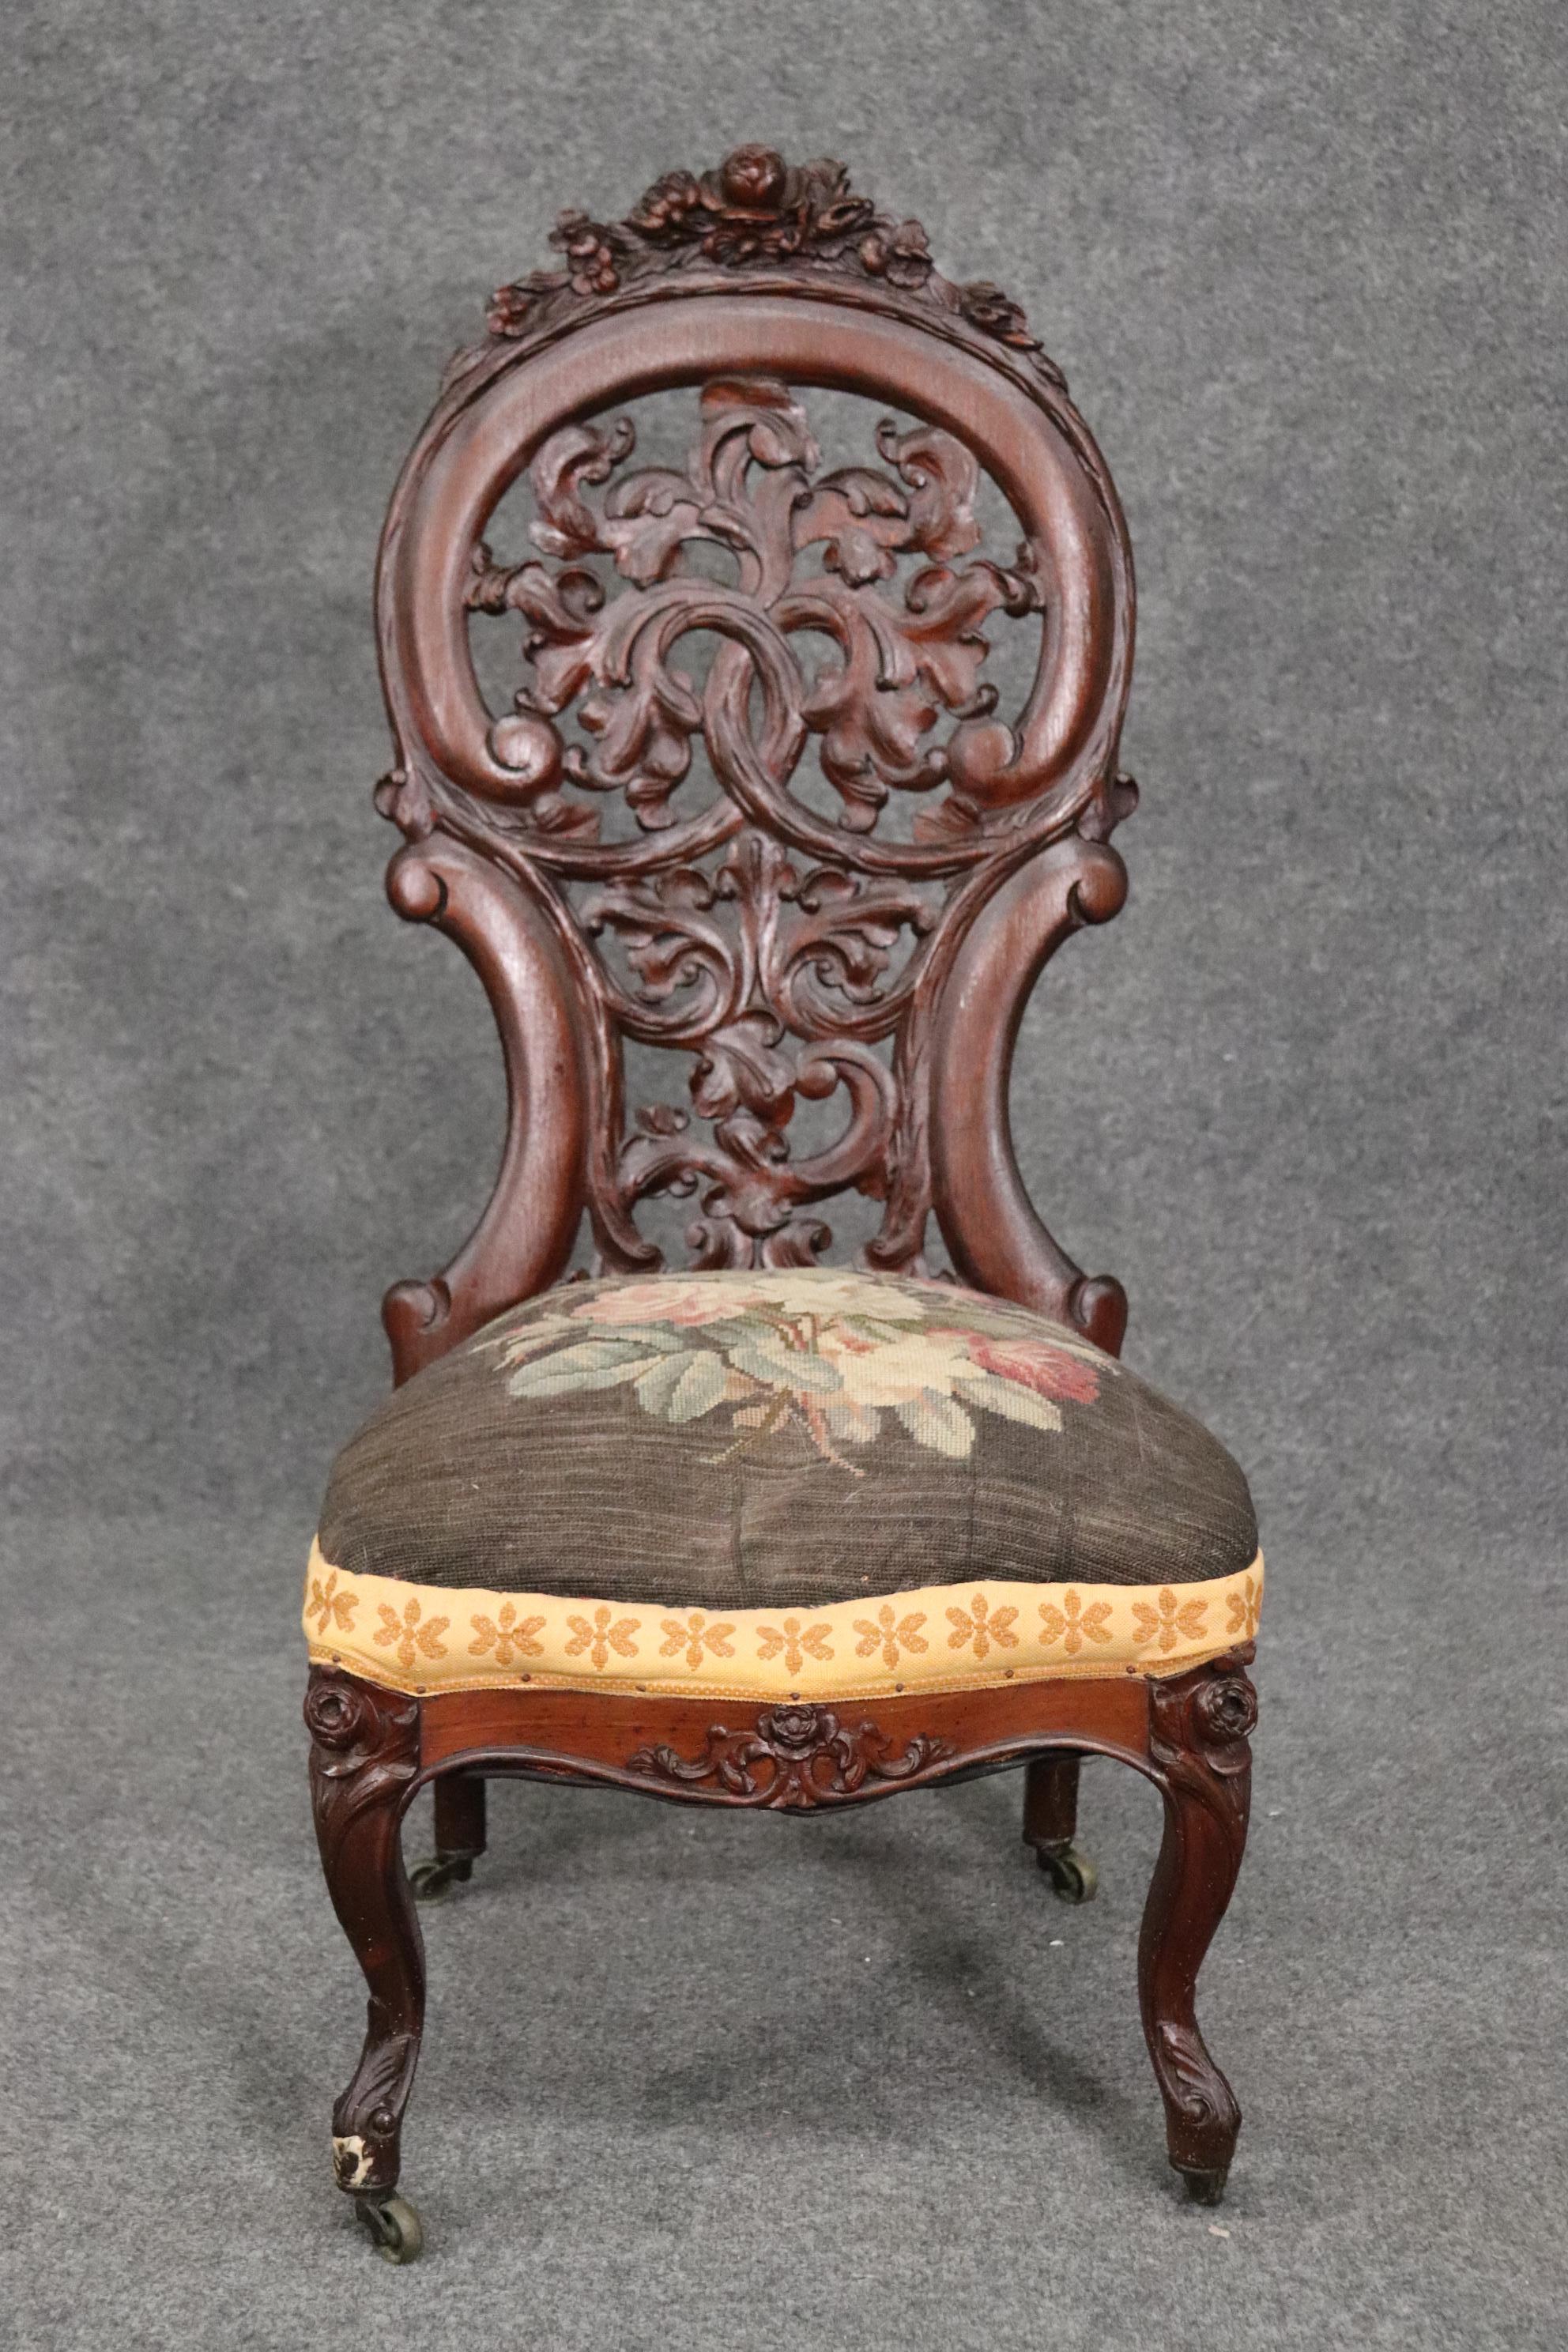 Late Victorian Meeks or Belter Laminated Rosewood Side Chair Circa 1860s